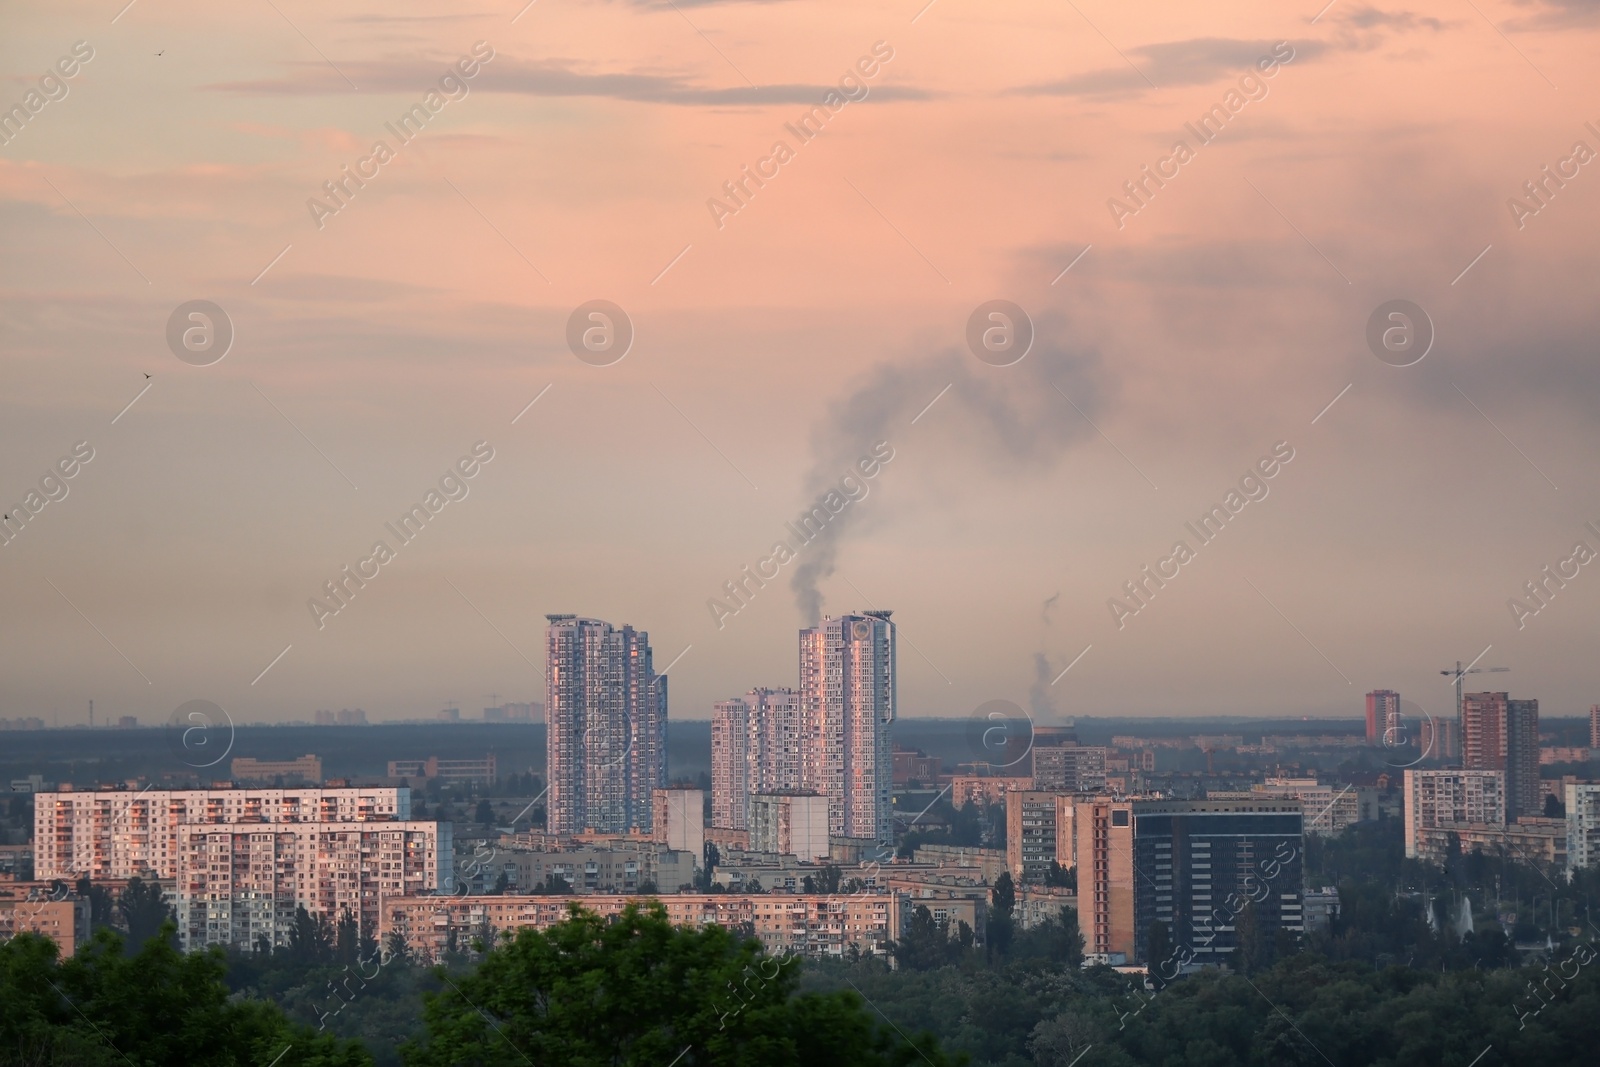 Photo of KYIV, UKRAINE - MAY 23, 2019: City district with modern buildings in evening